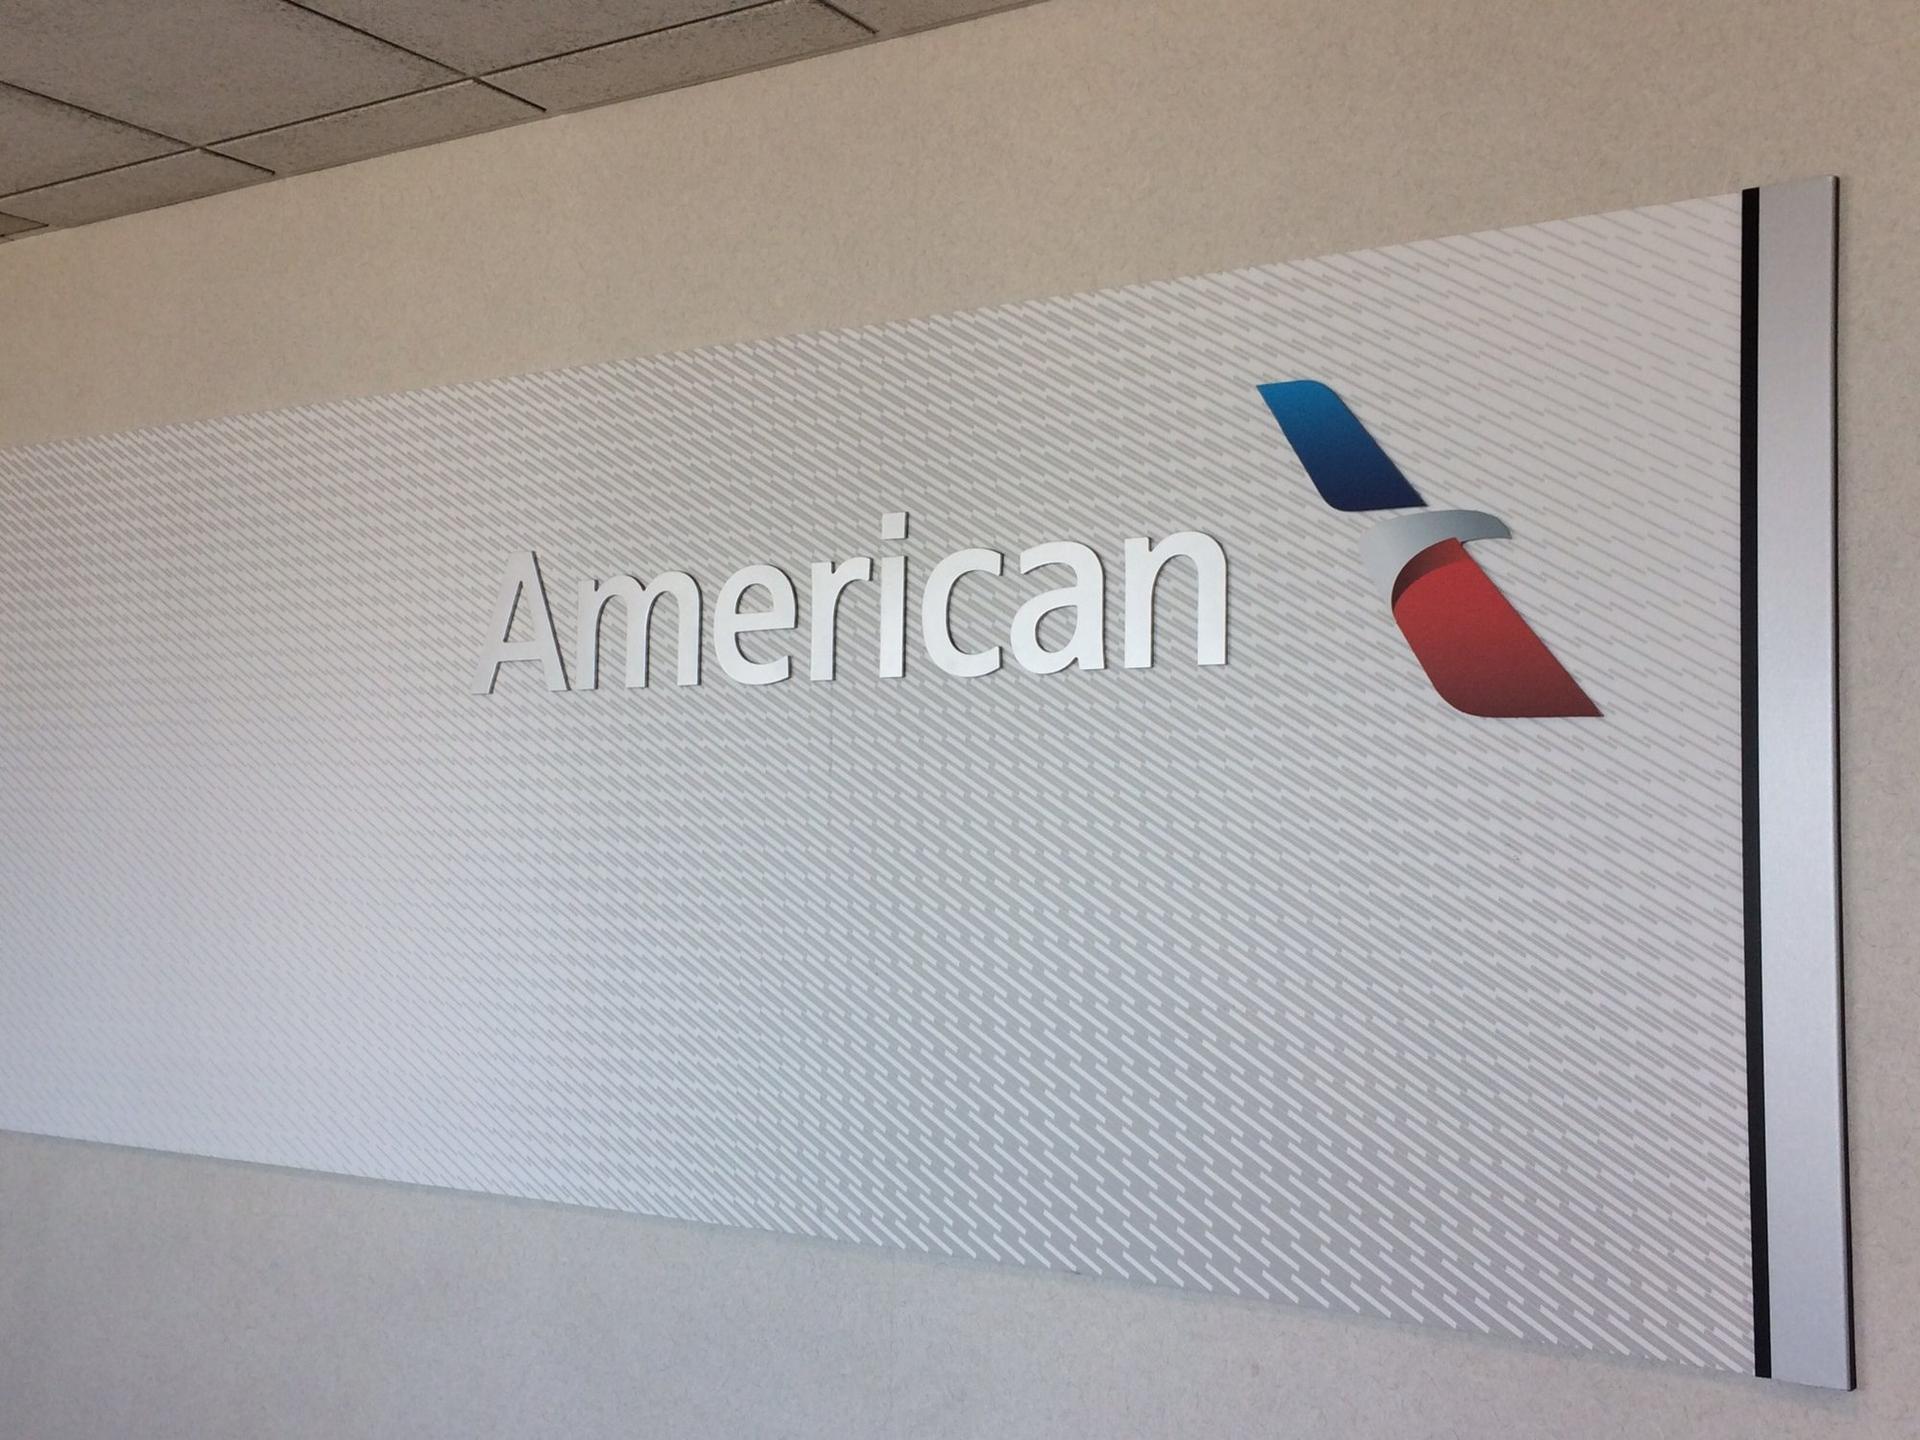 American Airlines Admirals Club image 37 of 48